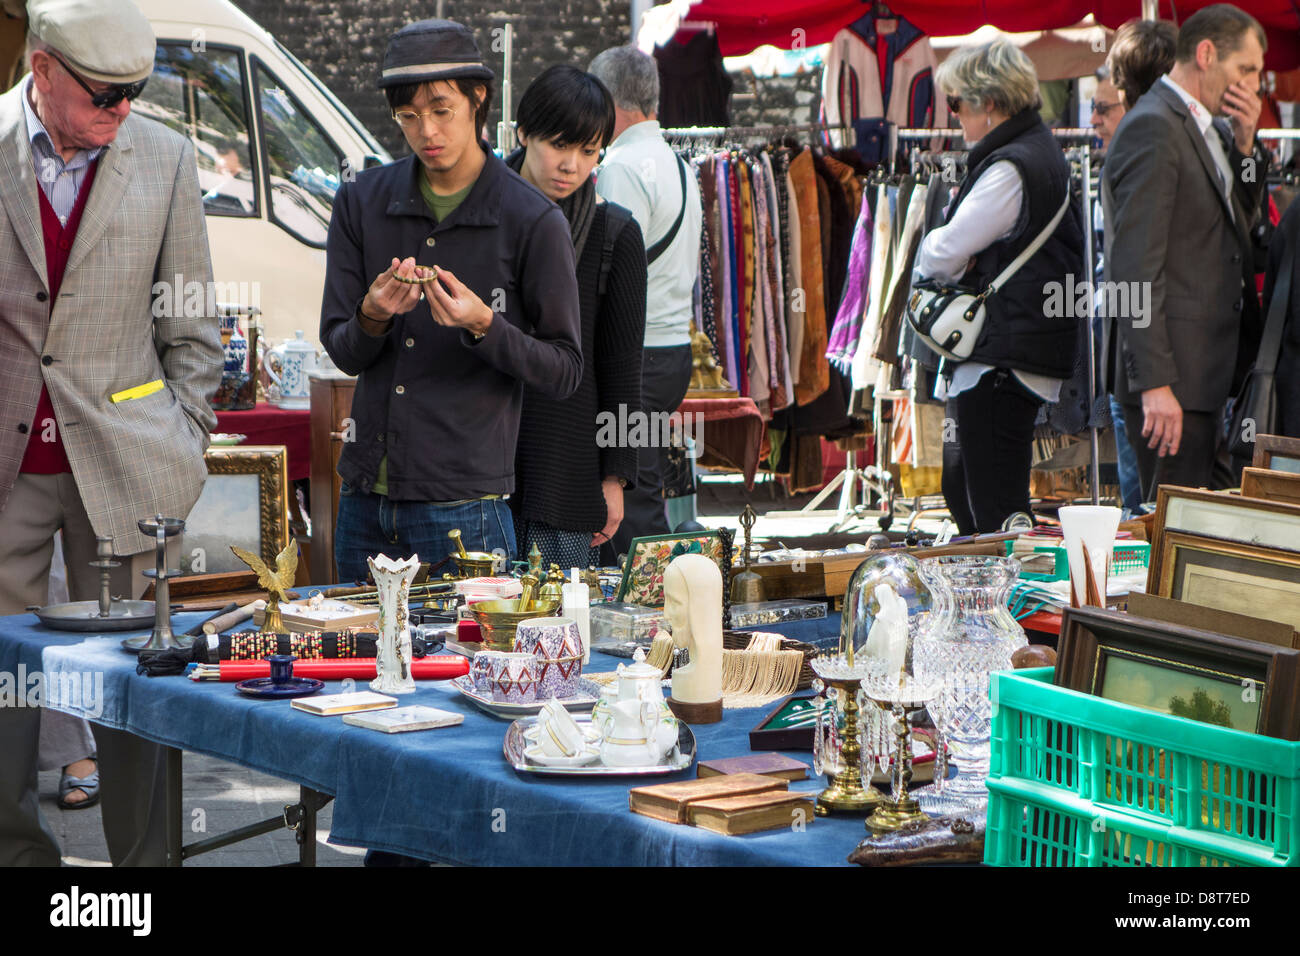 Japanese tourists looking at bric-a-brac and antiques for sale at flea market in town Stock Photo